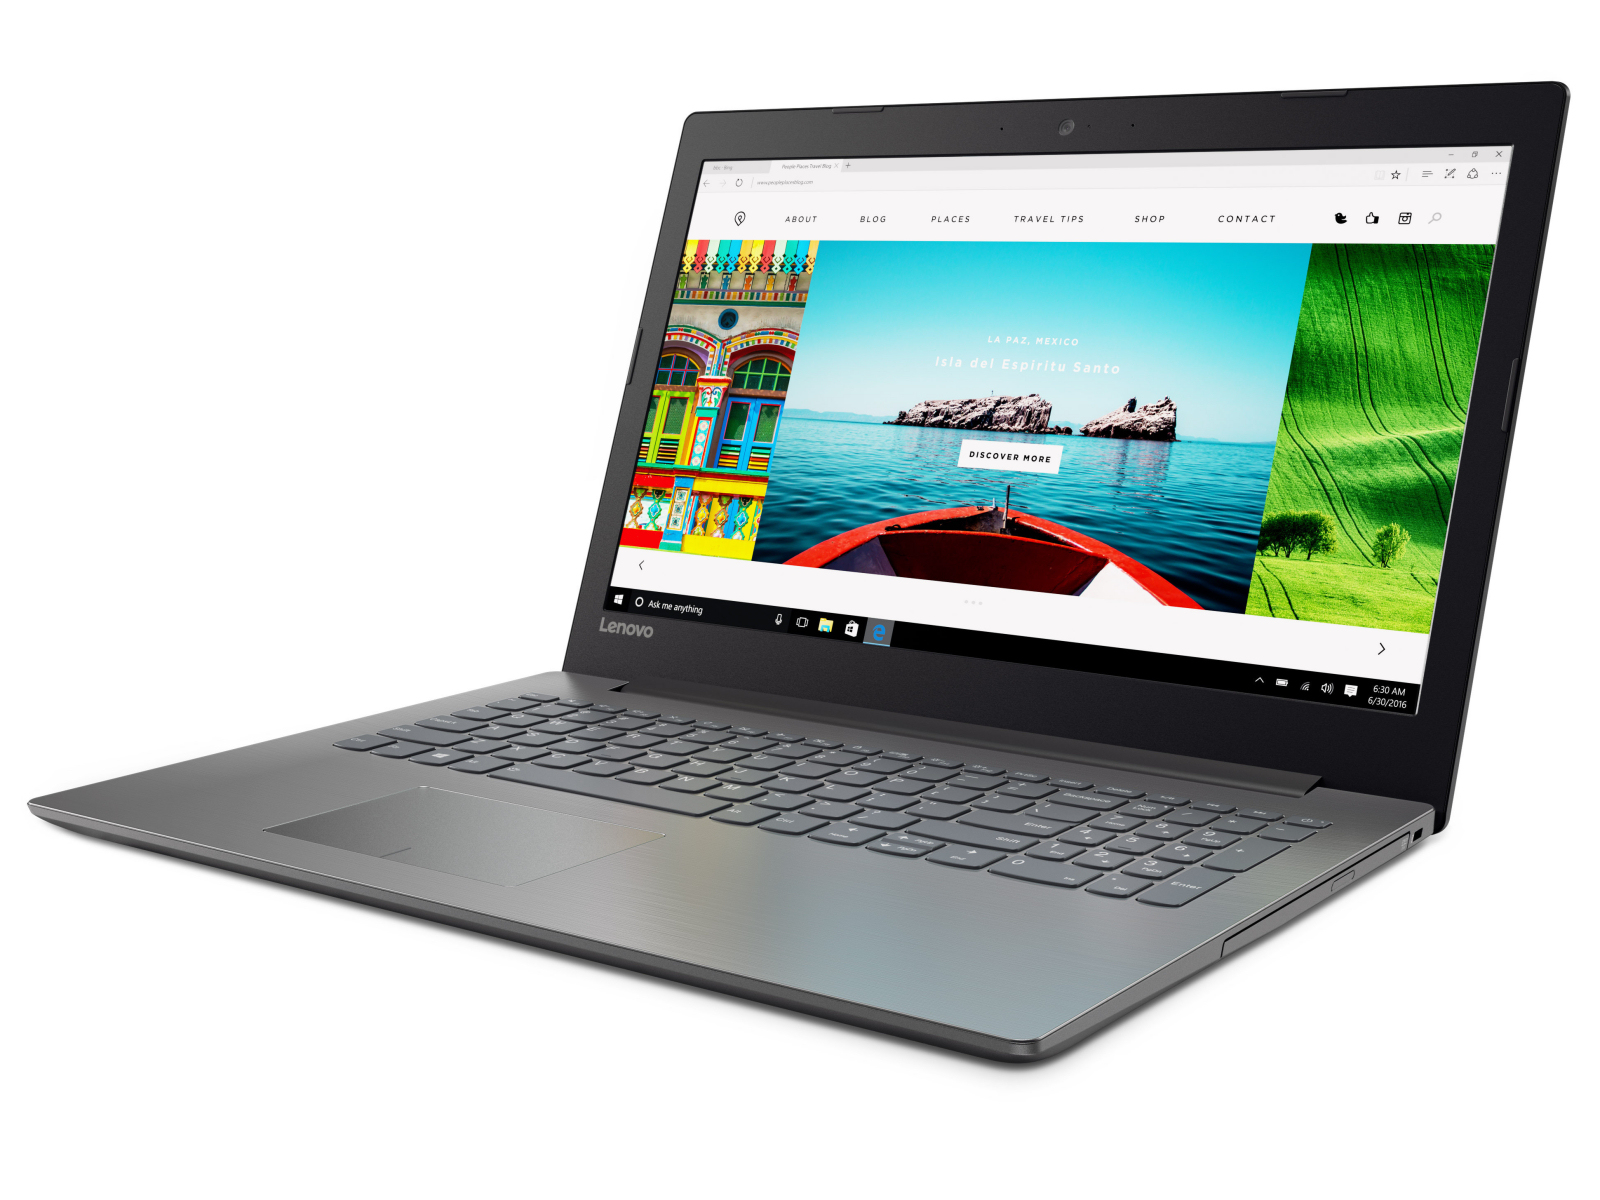 Lenovo Ideapad 320 Review: Beautiful and Portable, with Lenovo's Famous  Keyboard Design